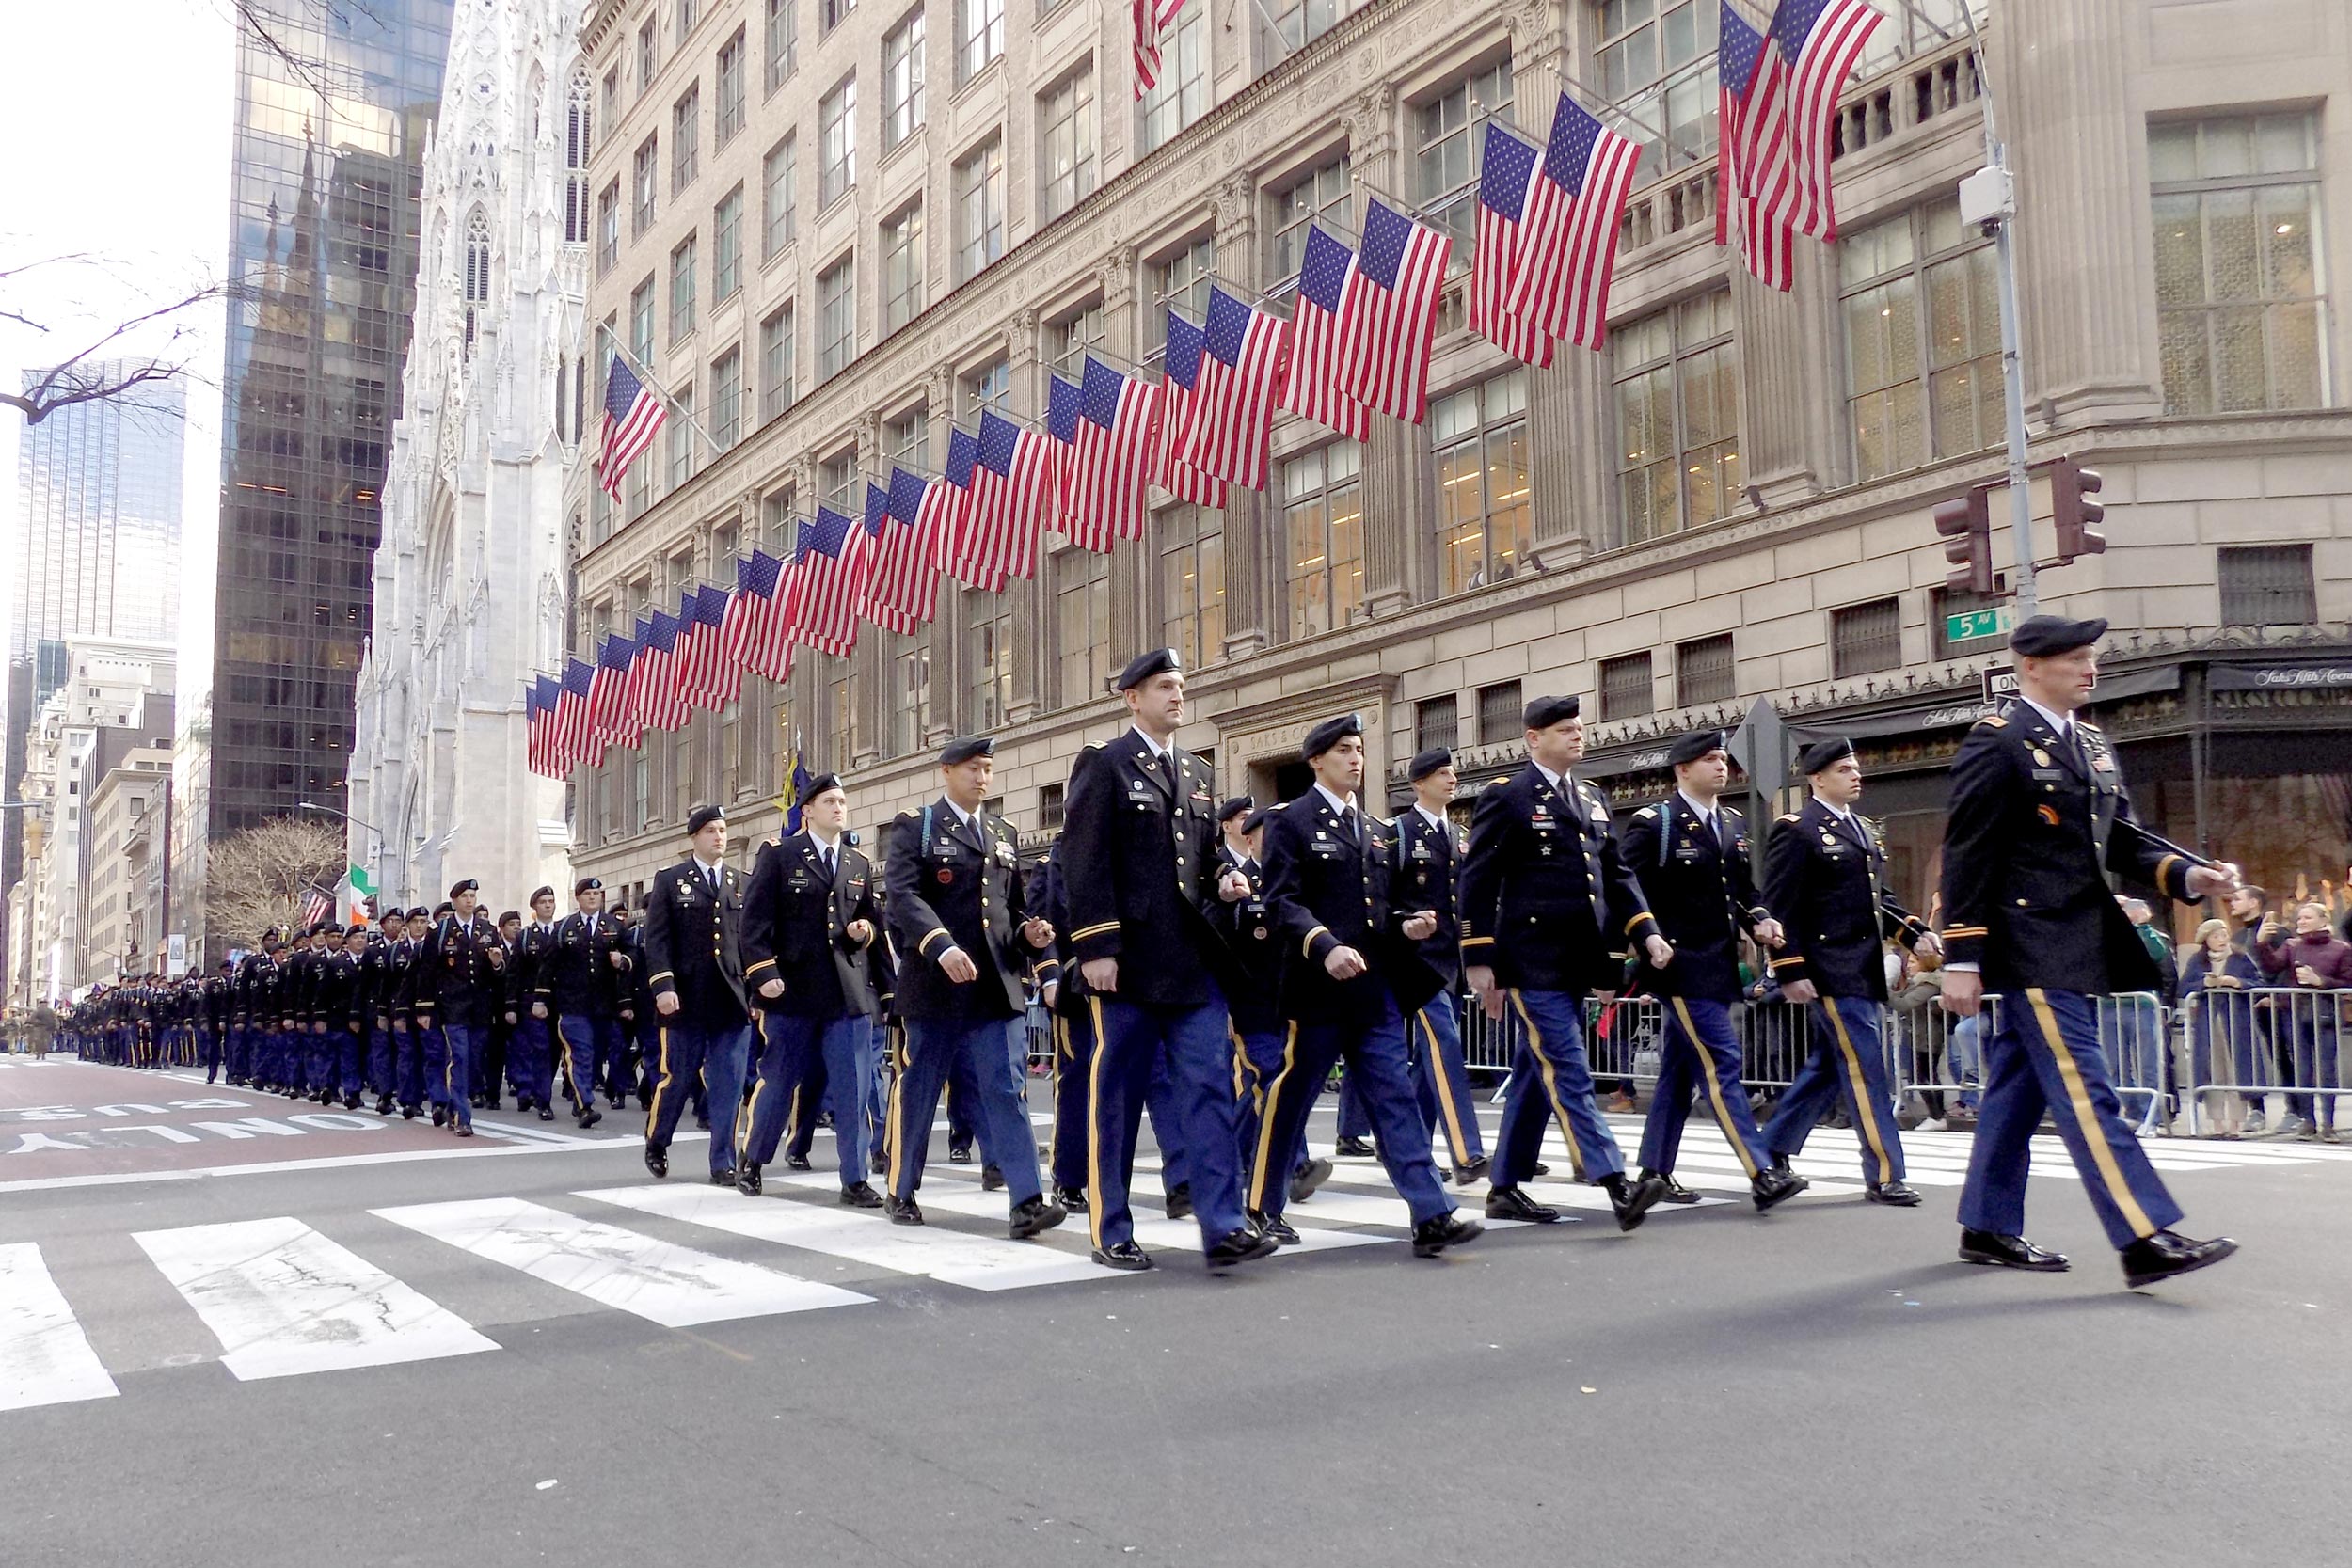 69th infantry dressed in their military uniforms marching down a New York street with USA flags above them on a building